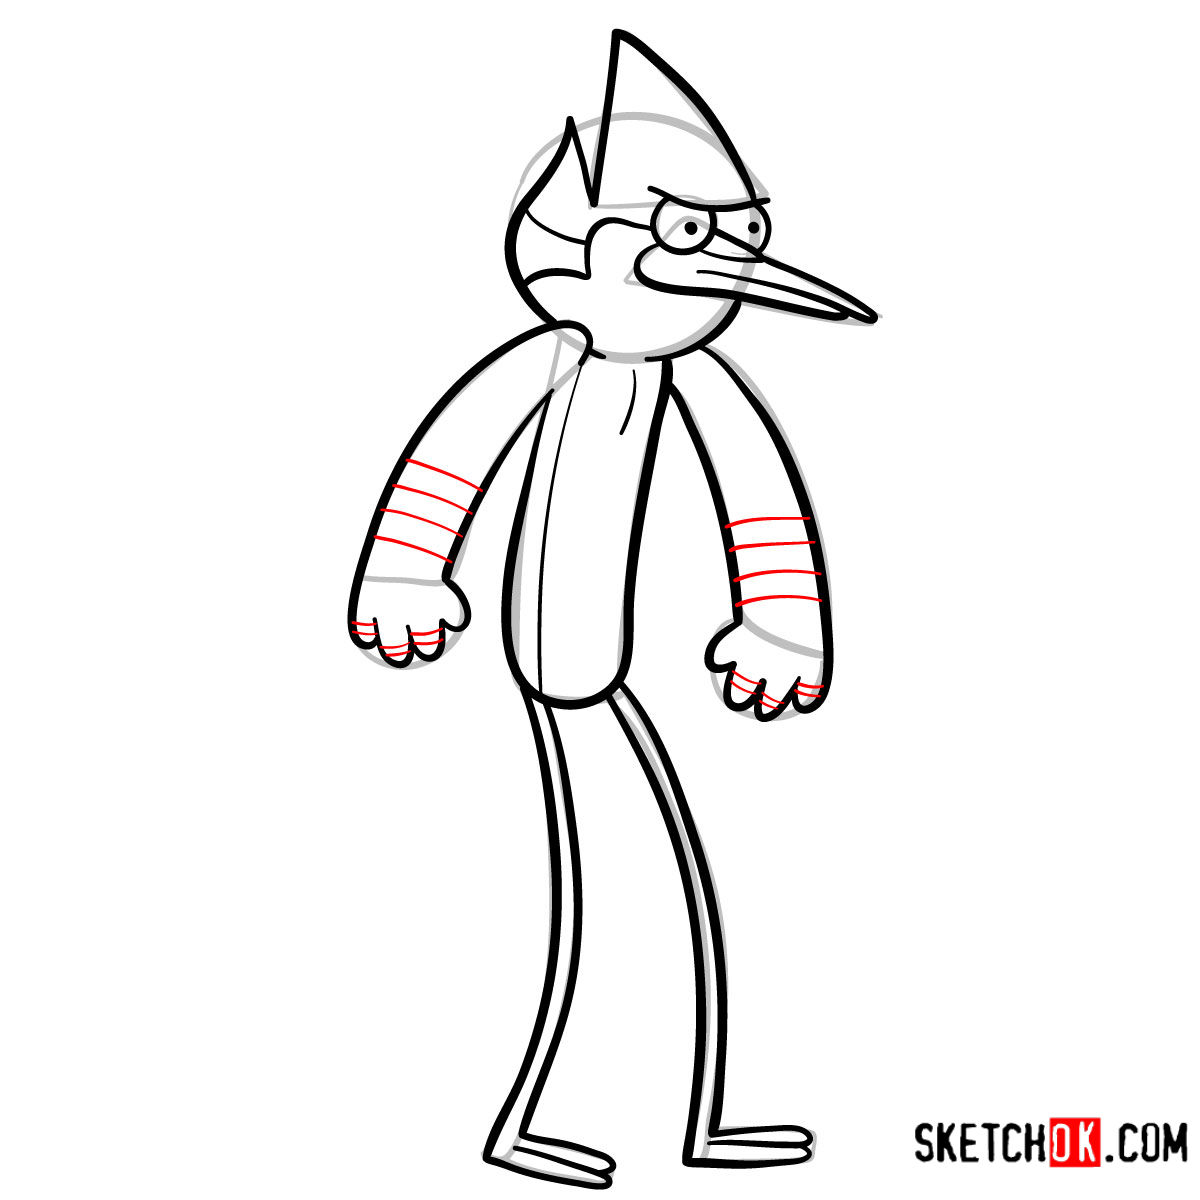 How to draw angry Mordecai step by step - step 09